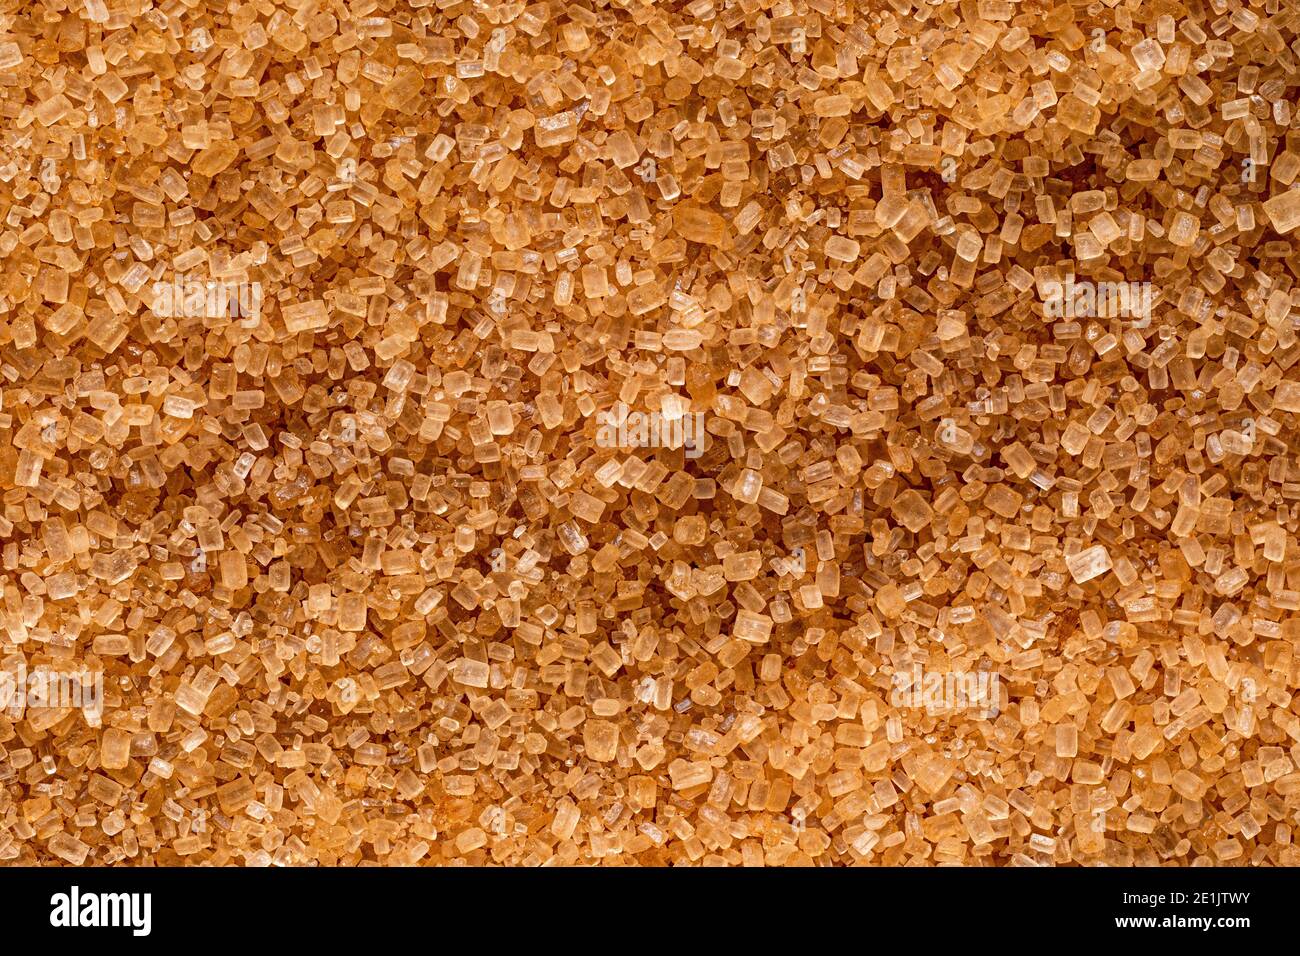 Background of light brown granulated sugar. Stock Photo